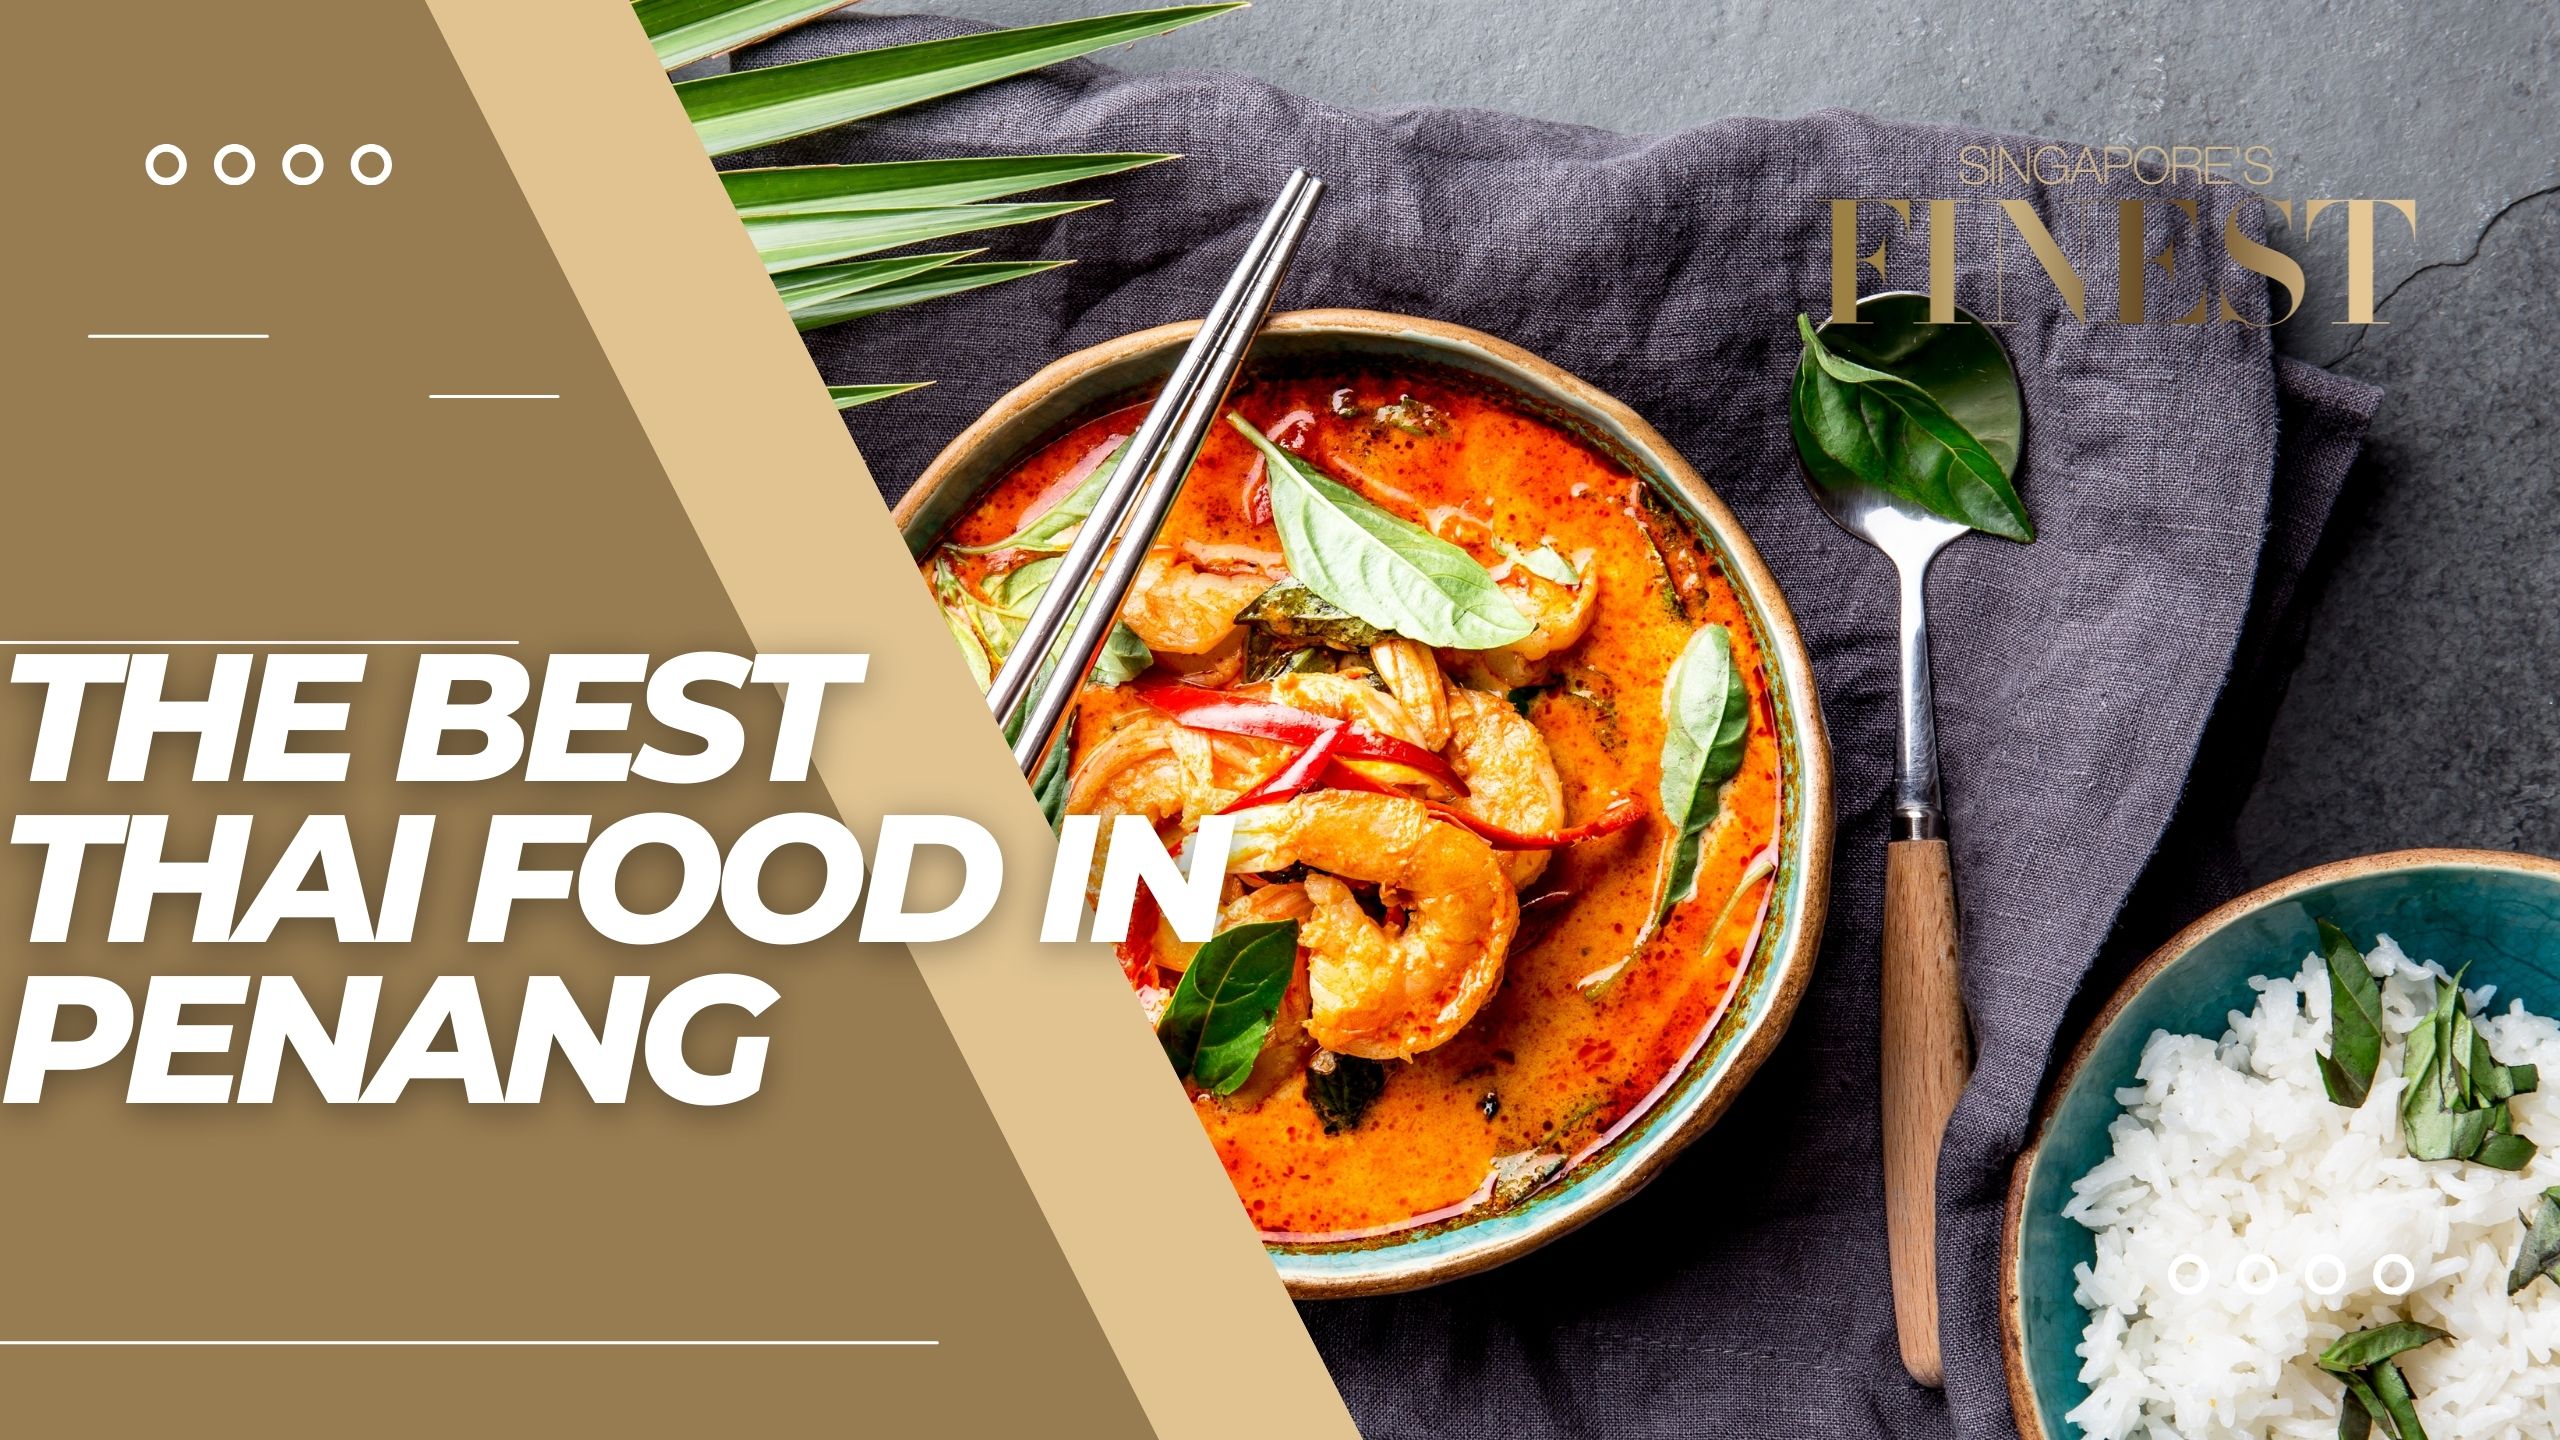 The Finest Thai Food in Penang